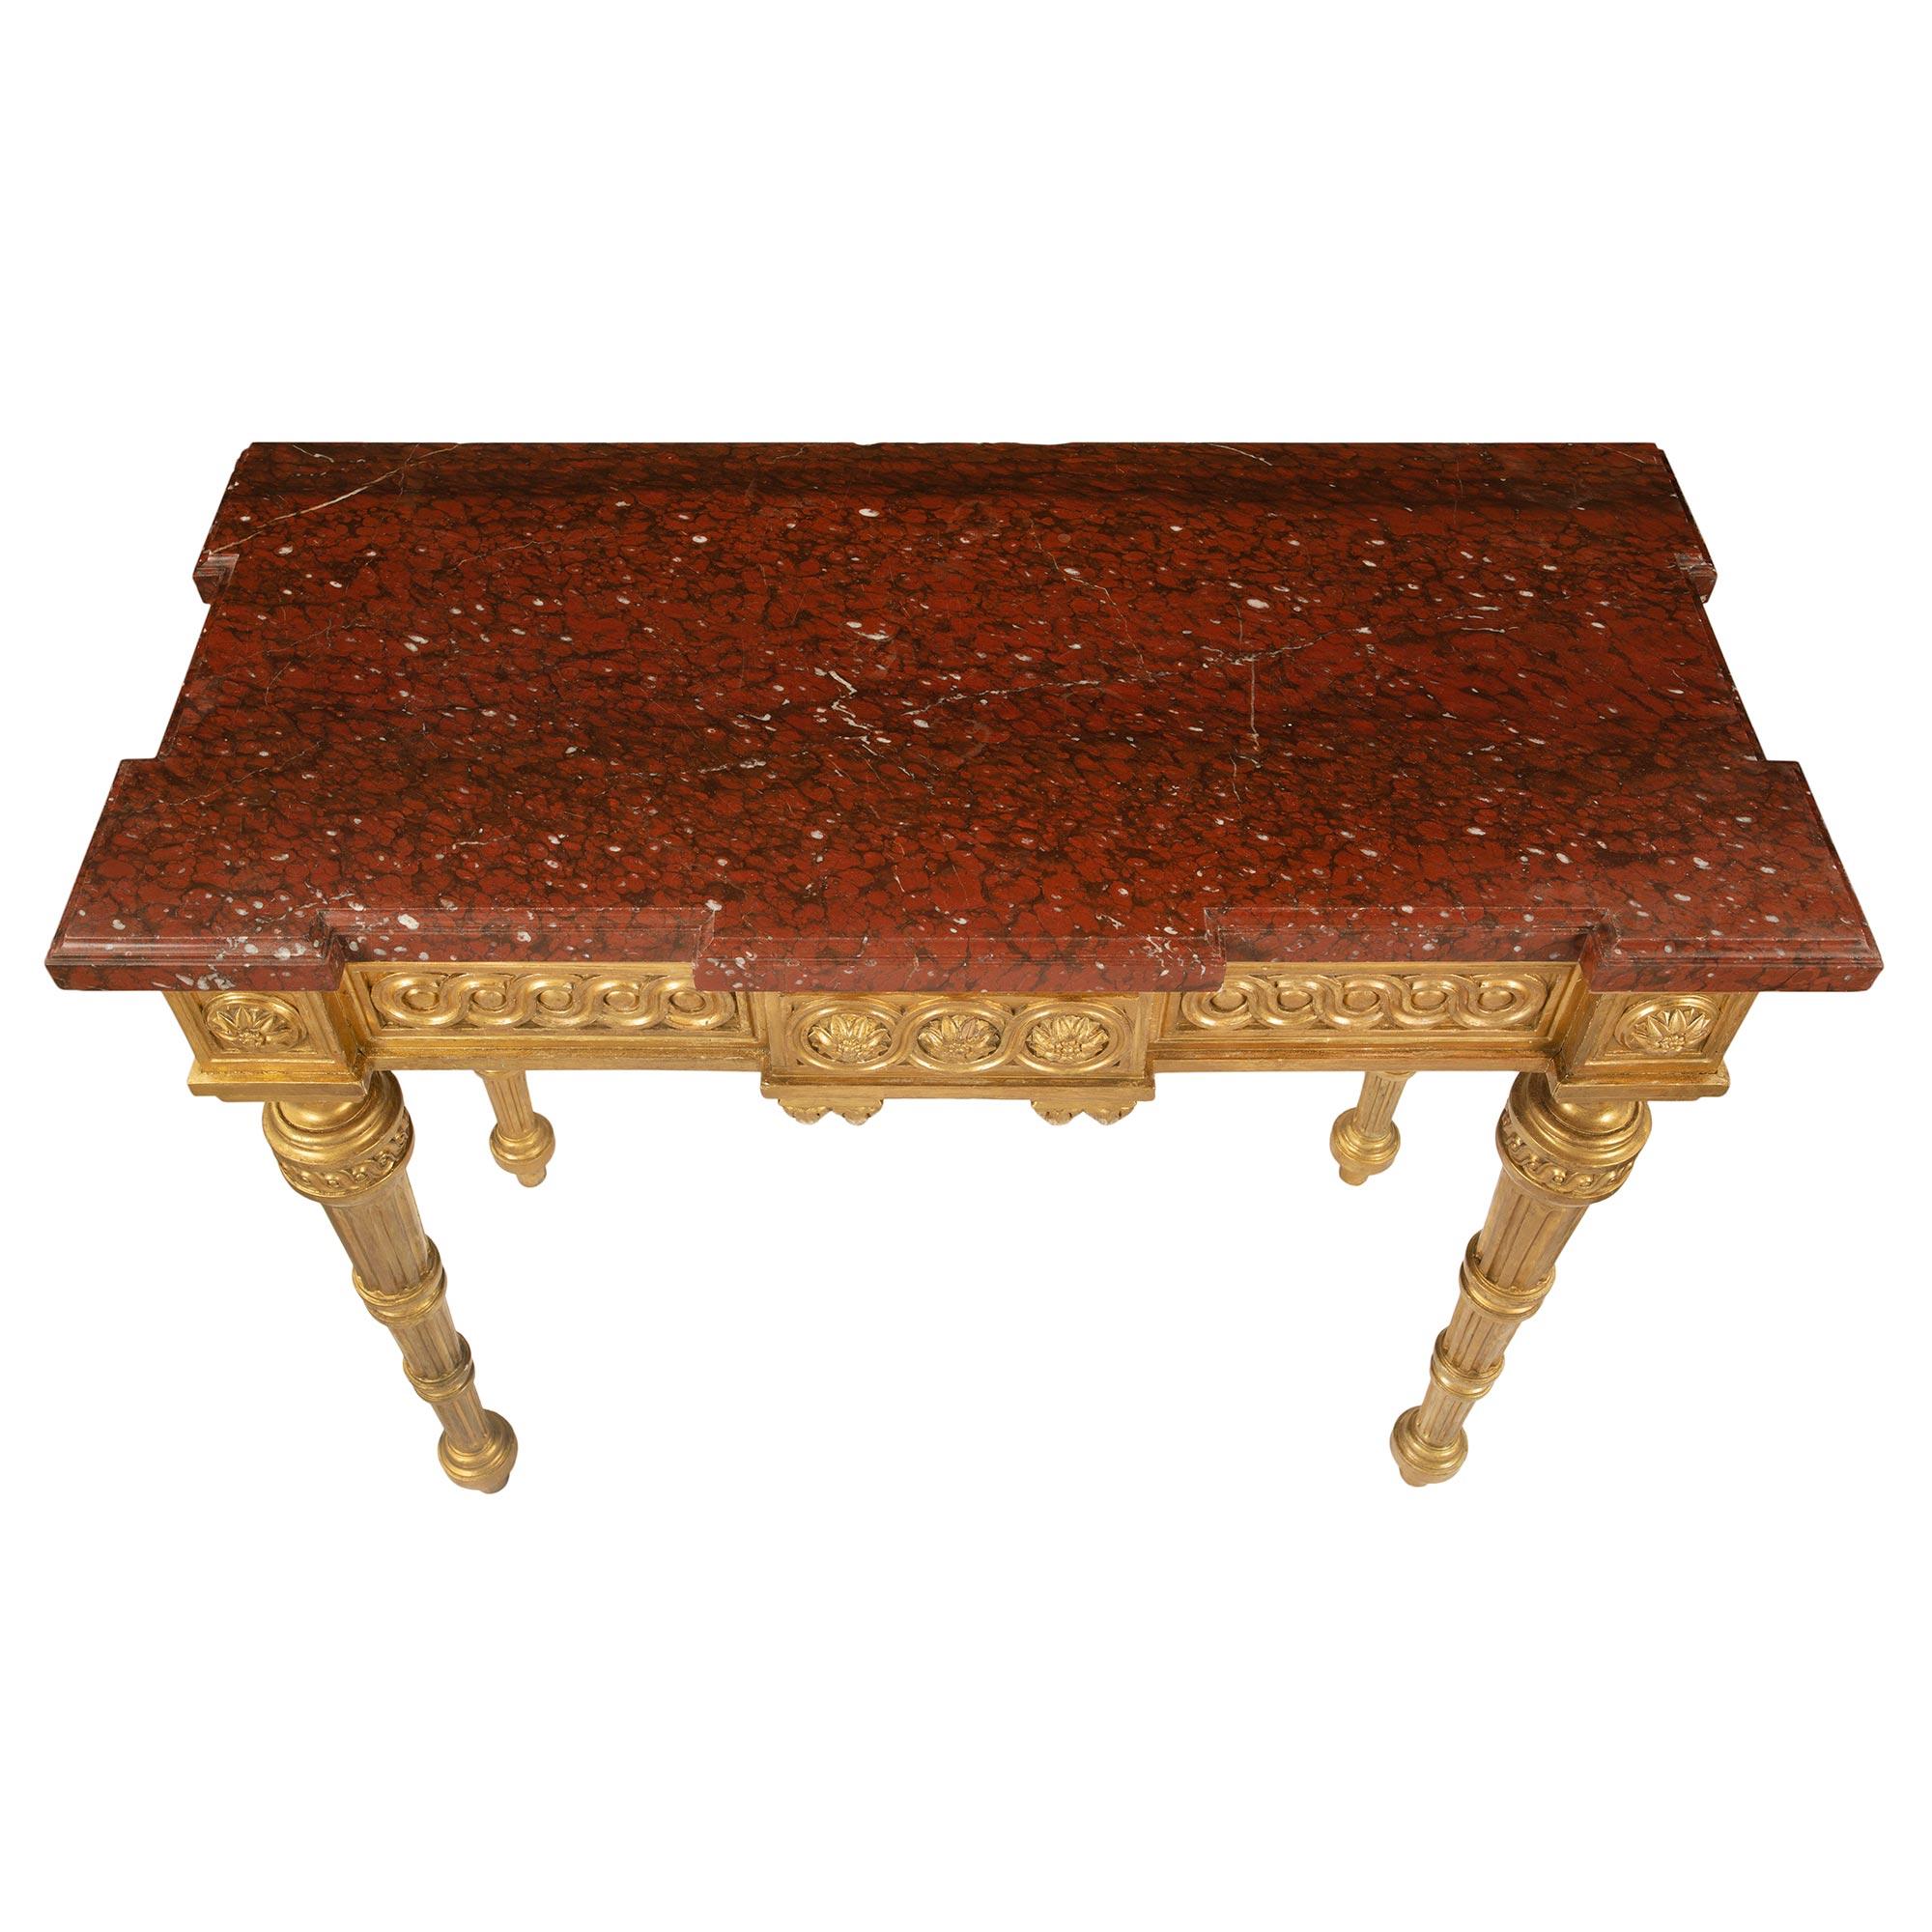 An extremely elegant French 19th century Louis XVI st. giltwood and Rouge Griotte marble freestanding console. The console is raised by circular tapered fluted legs with carved mottled designs, topie shaped feet and fine fitted Entrelacs et Les